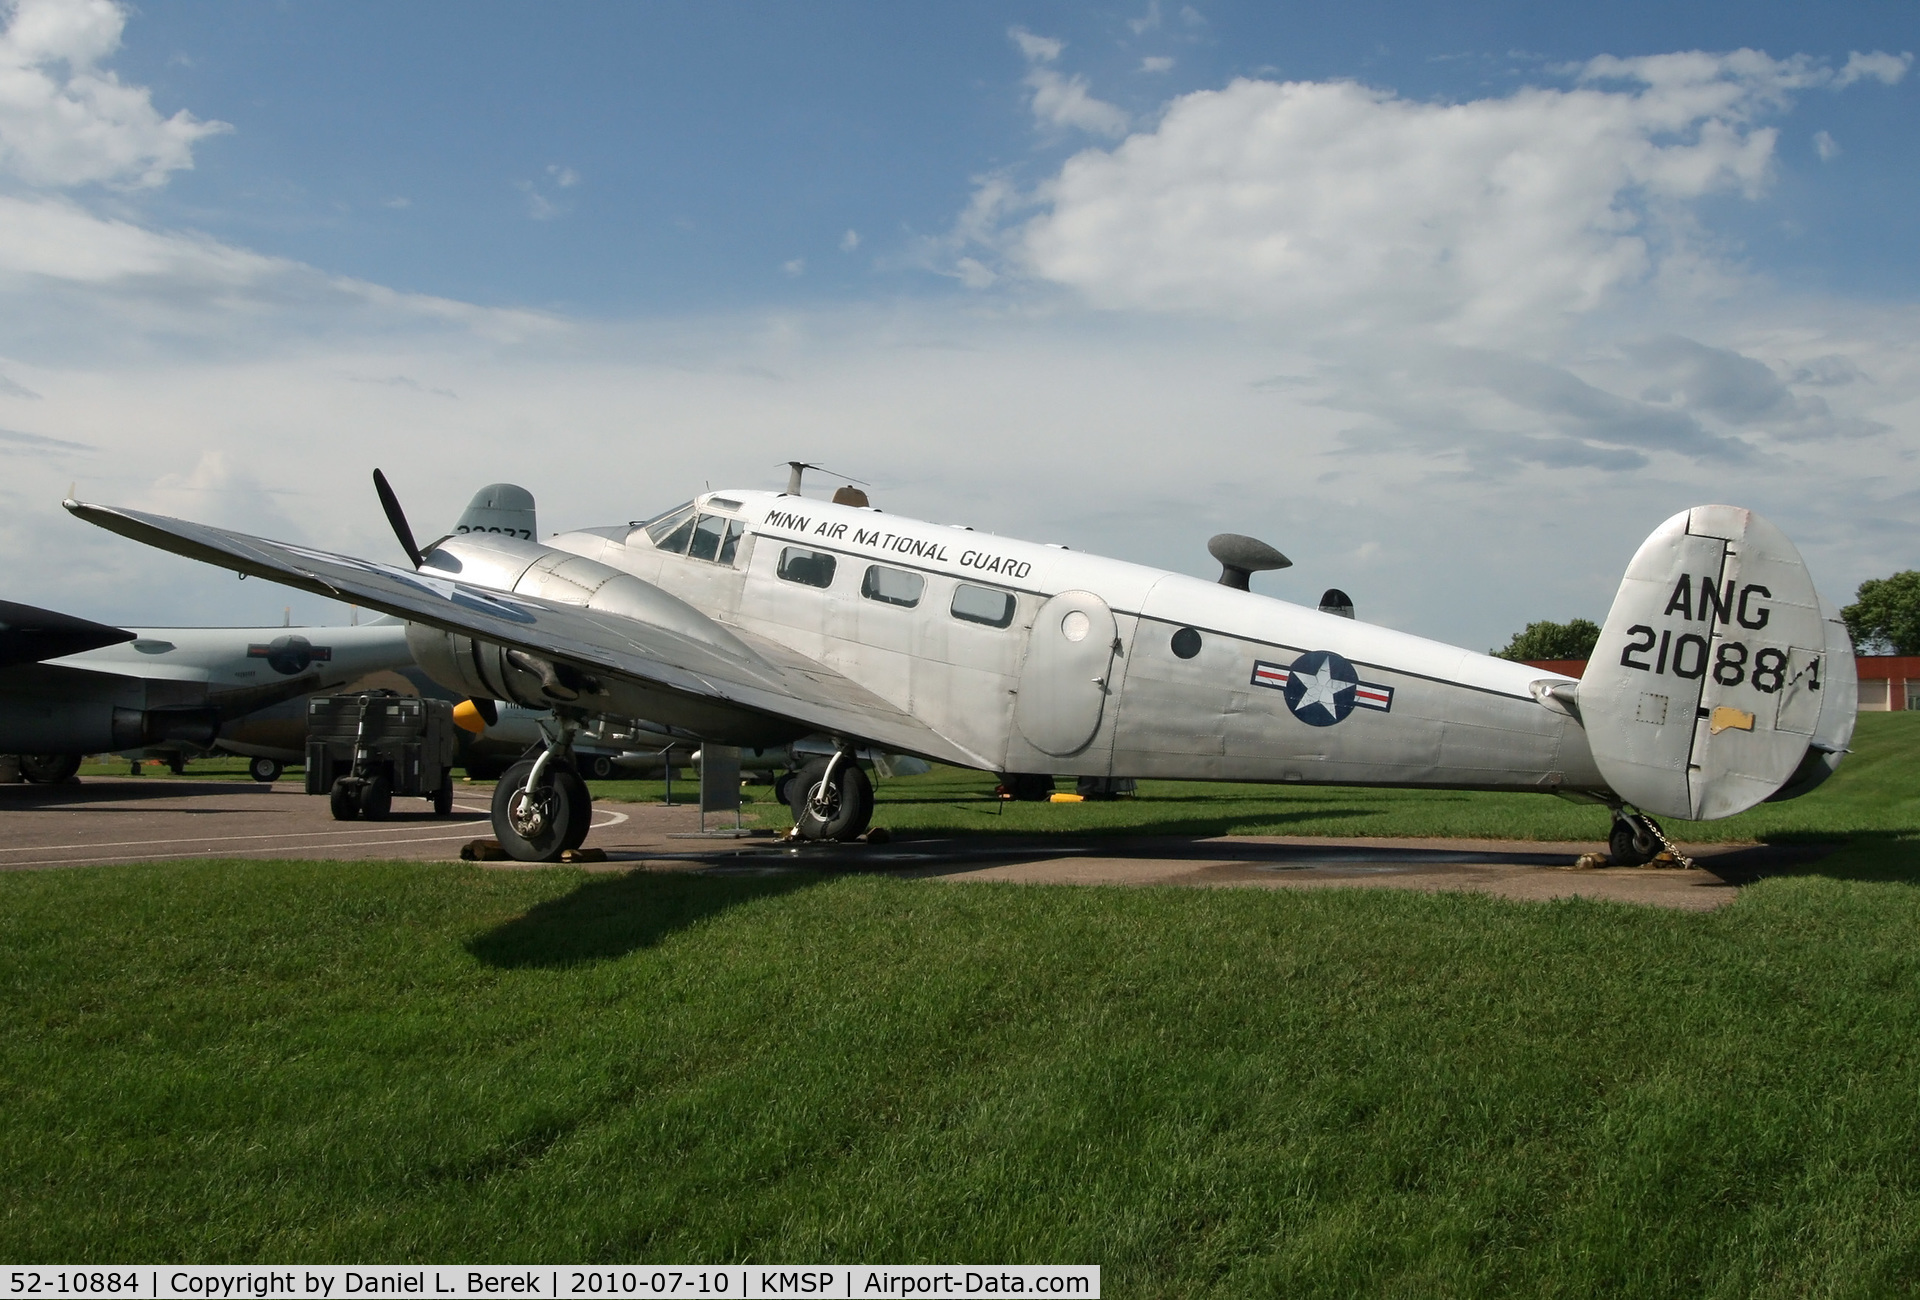 52-10884, 1952 Beech C-45H Expeditor C/N AF-814, Classic twin Beech on display at the Minnesota Air Guard Museum.